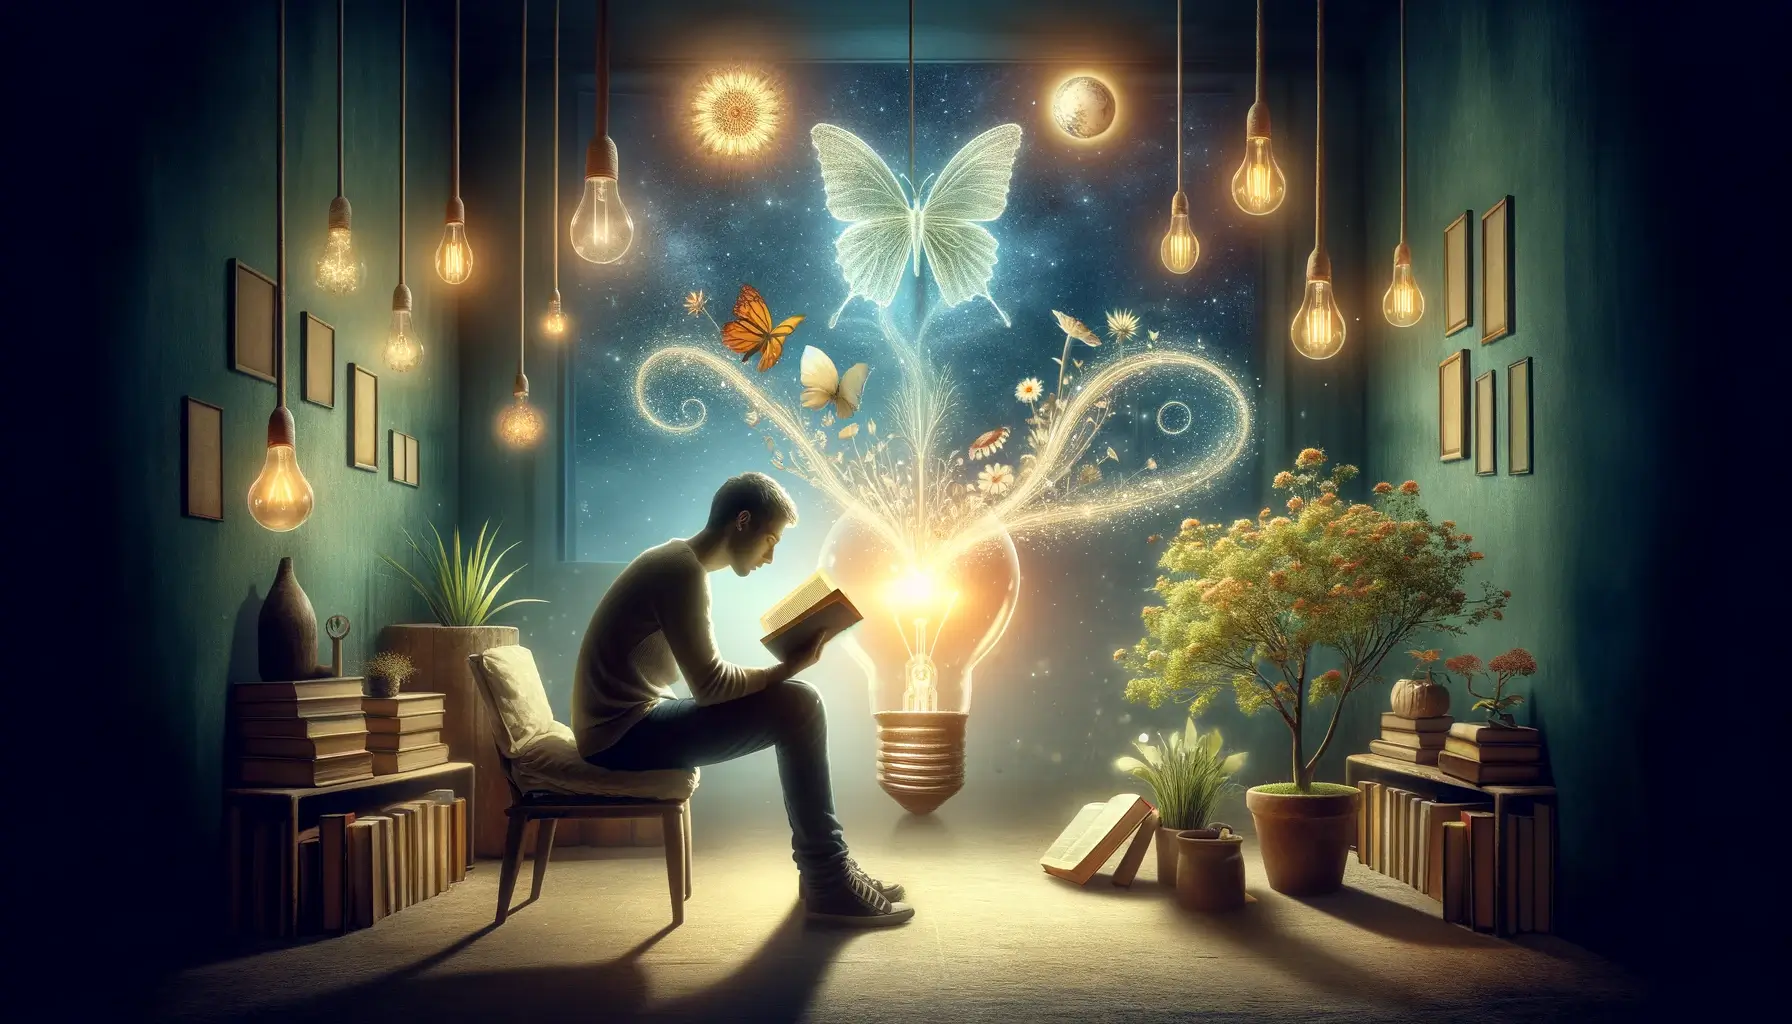 A person engrossed in reading a book with an illustrated light bulb above, emitting a creative burst of energy with butterflies, plants, and celestial bodies, symbolizing transformative ideas in a cozy reading nook.